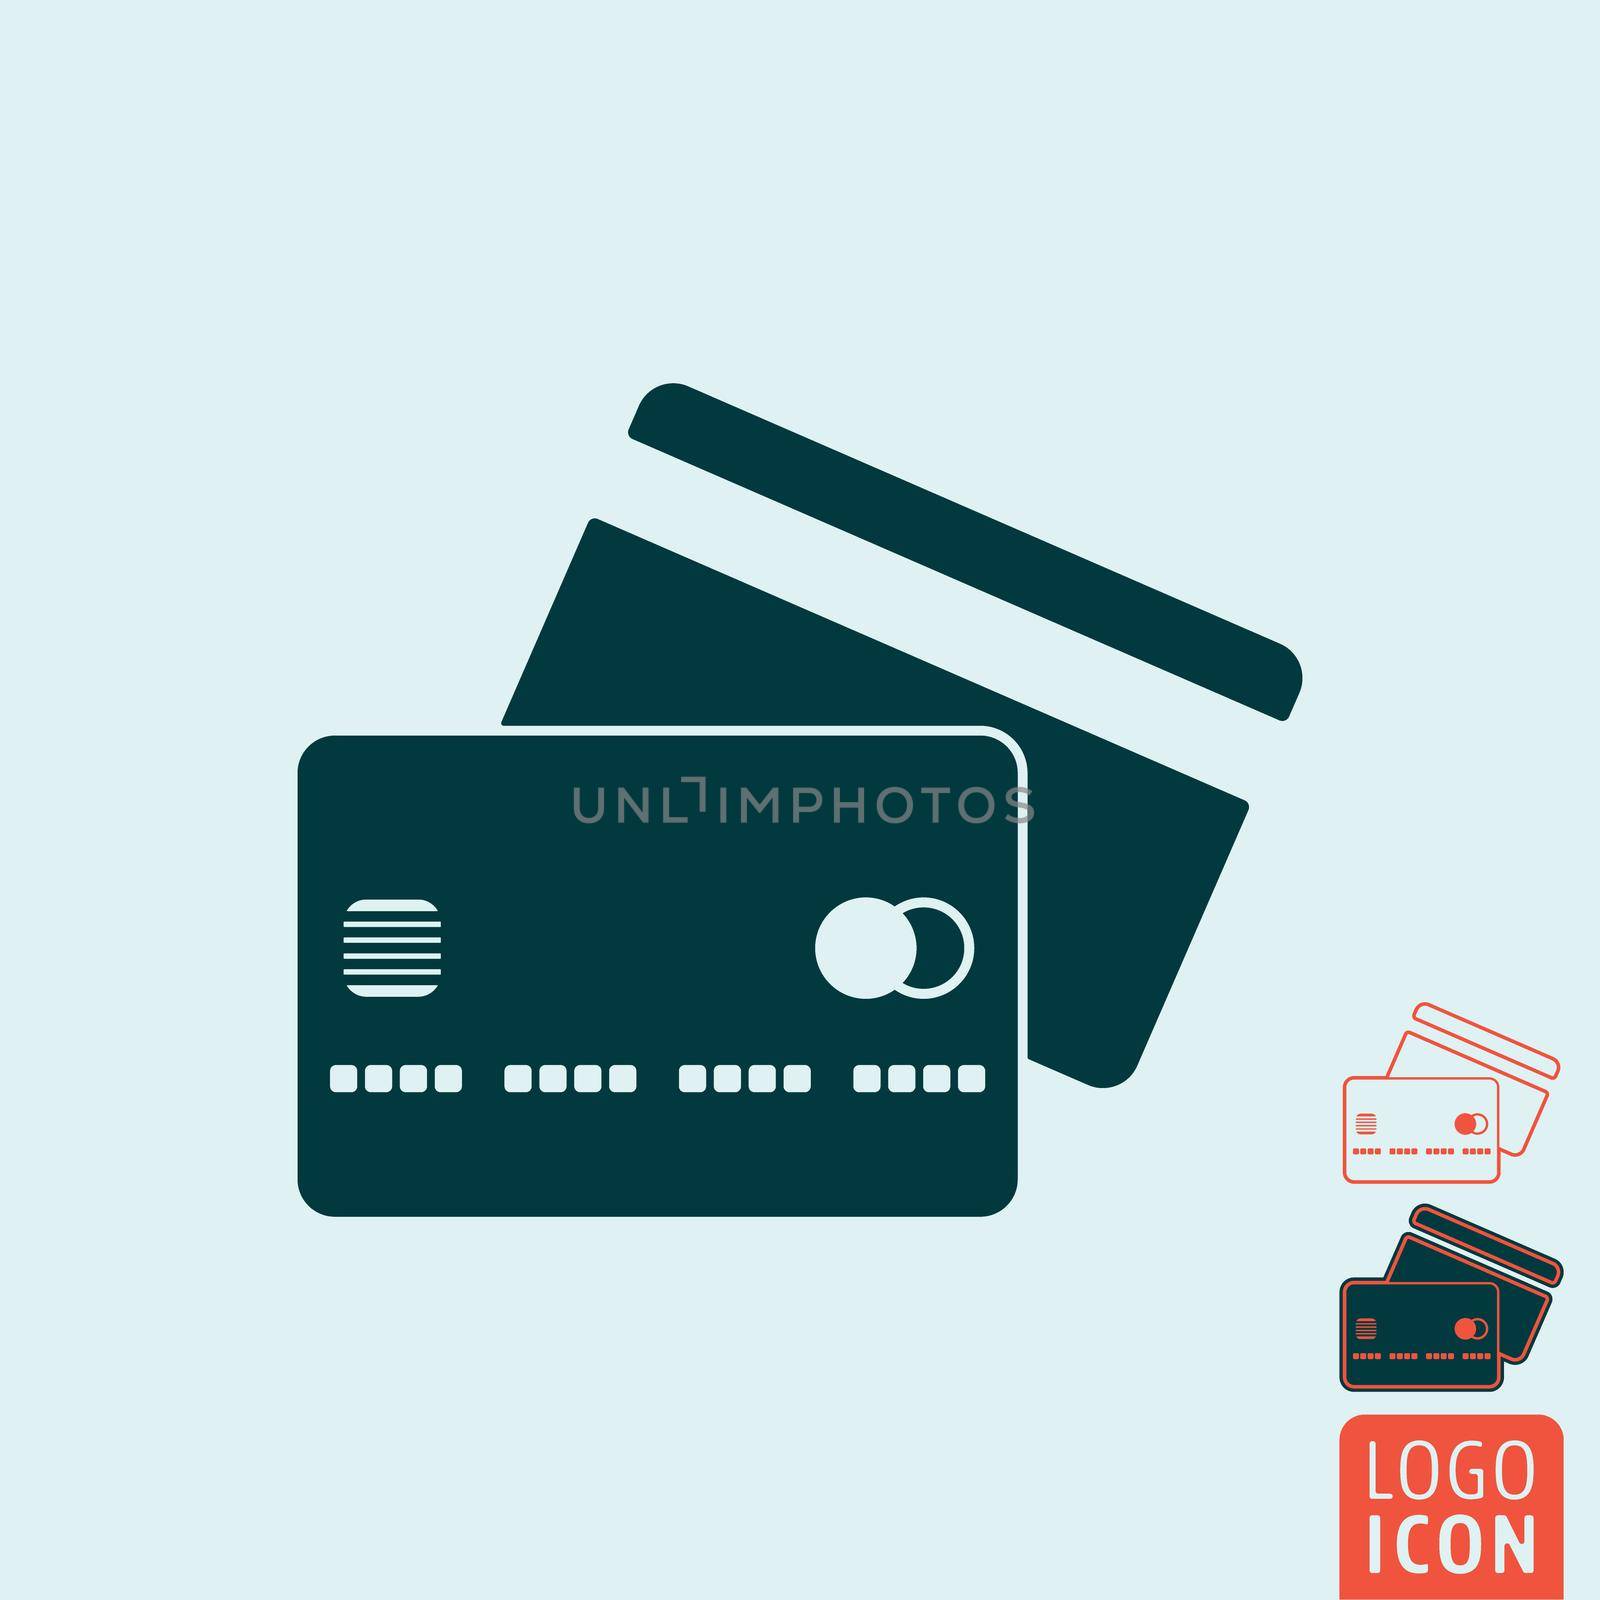 Credit card icon isolated by Bobnevv